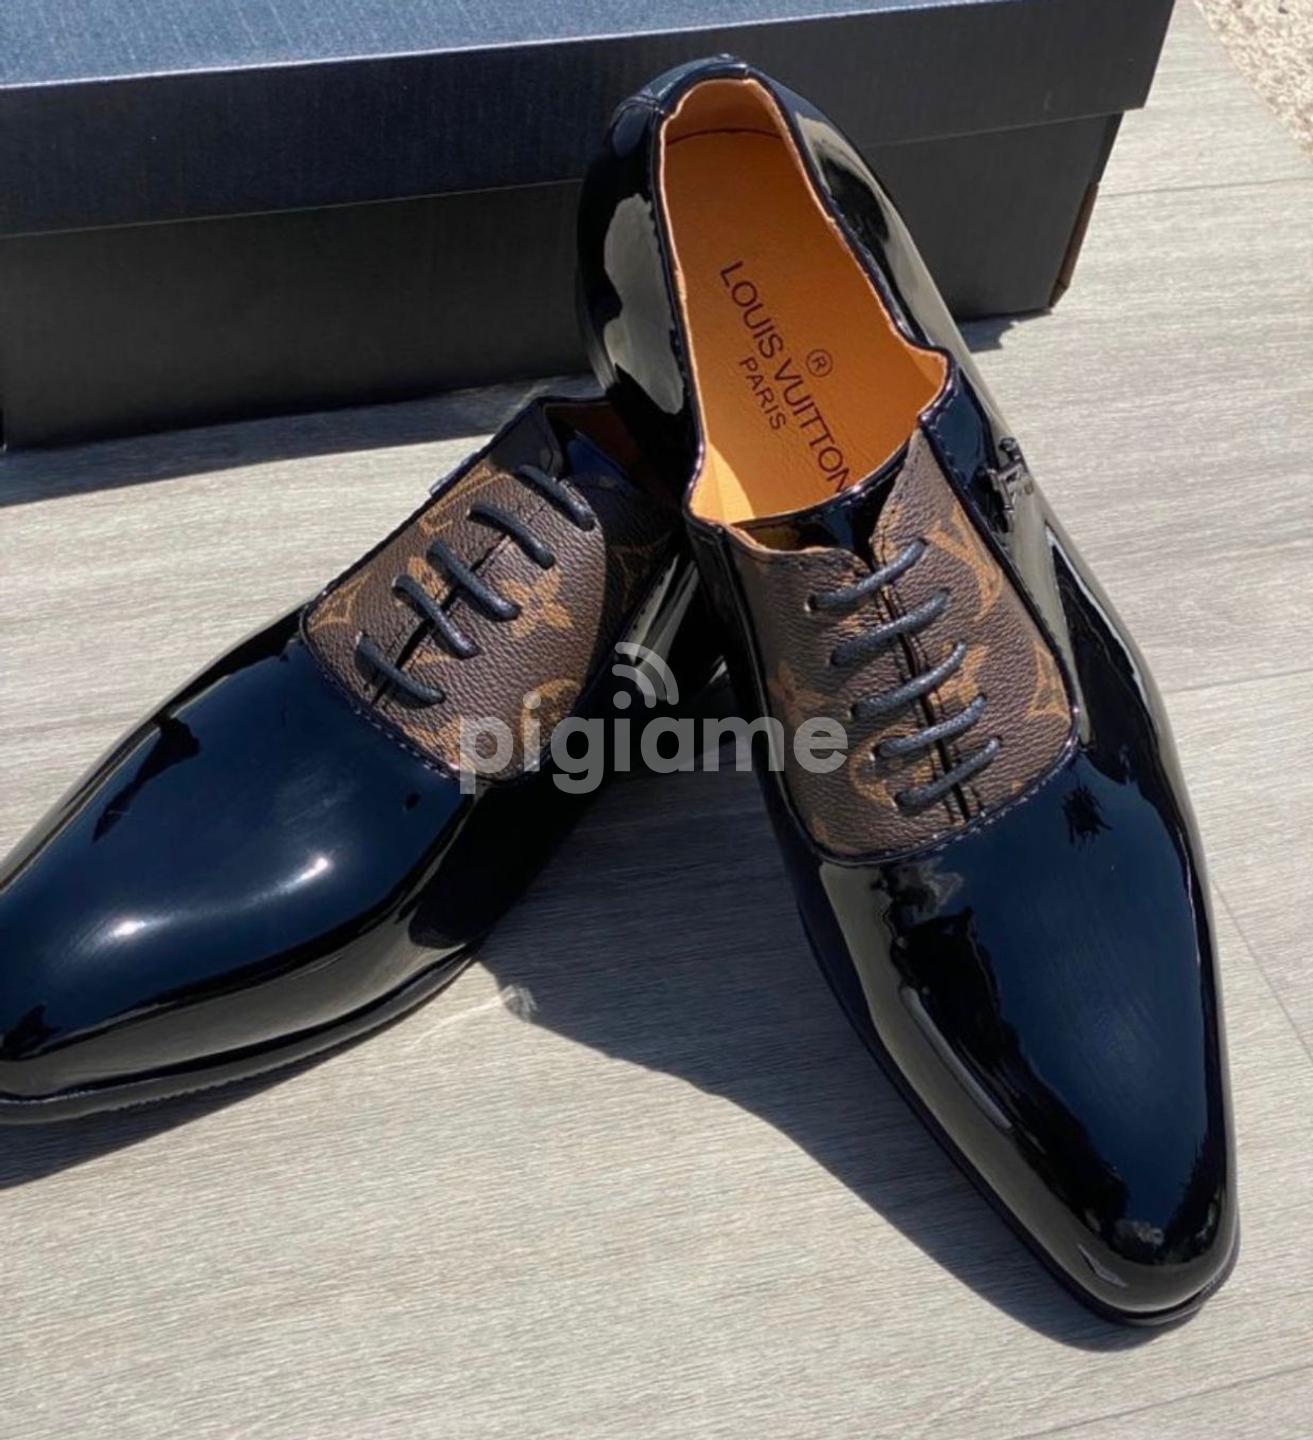 leather brown louis vuitton formal shoes